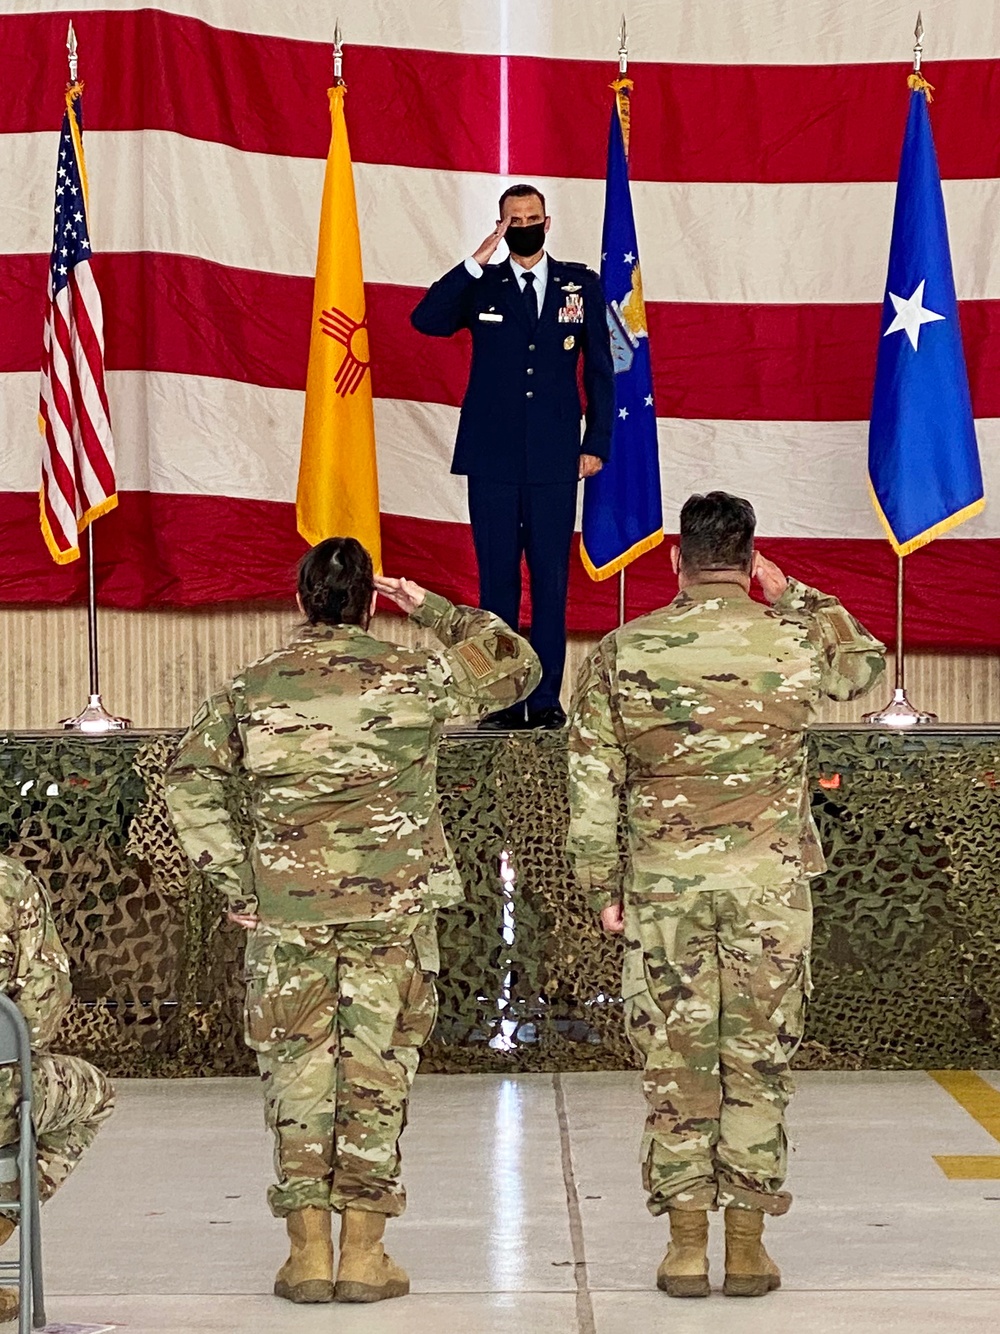 Colonel George Sefzik receives his first salute as the commander of the 150th Special Operations Wing